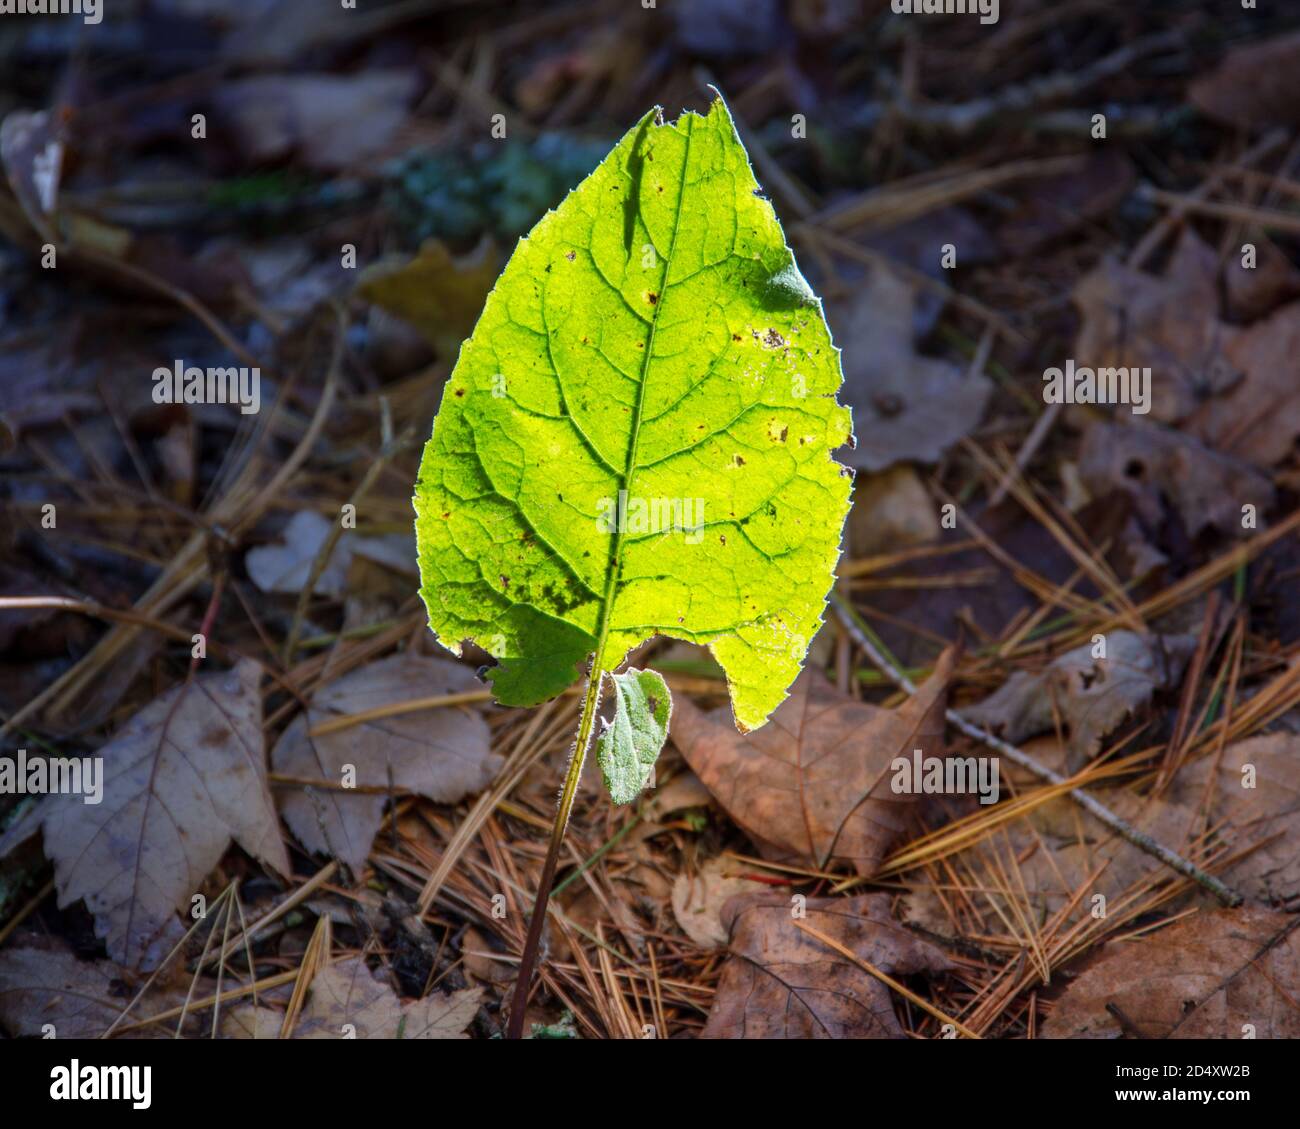 Sunlight backlighting green leaf with veins visible.  In Arcadia national park Maine. Stock Photo